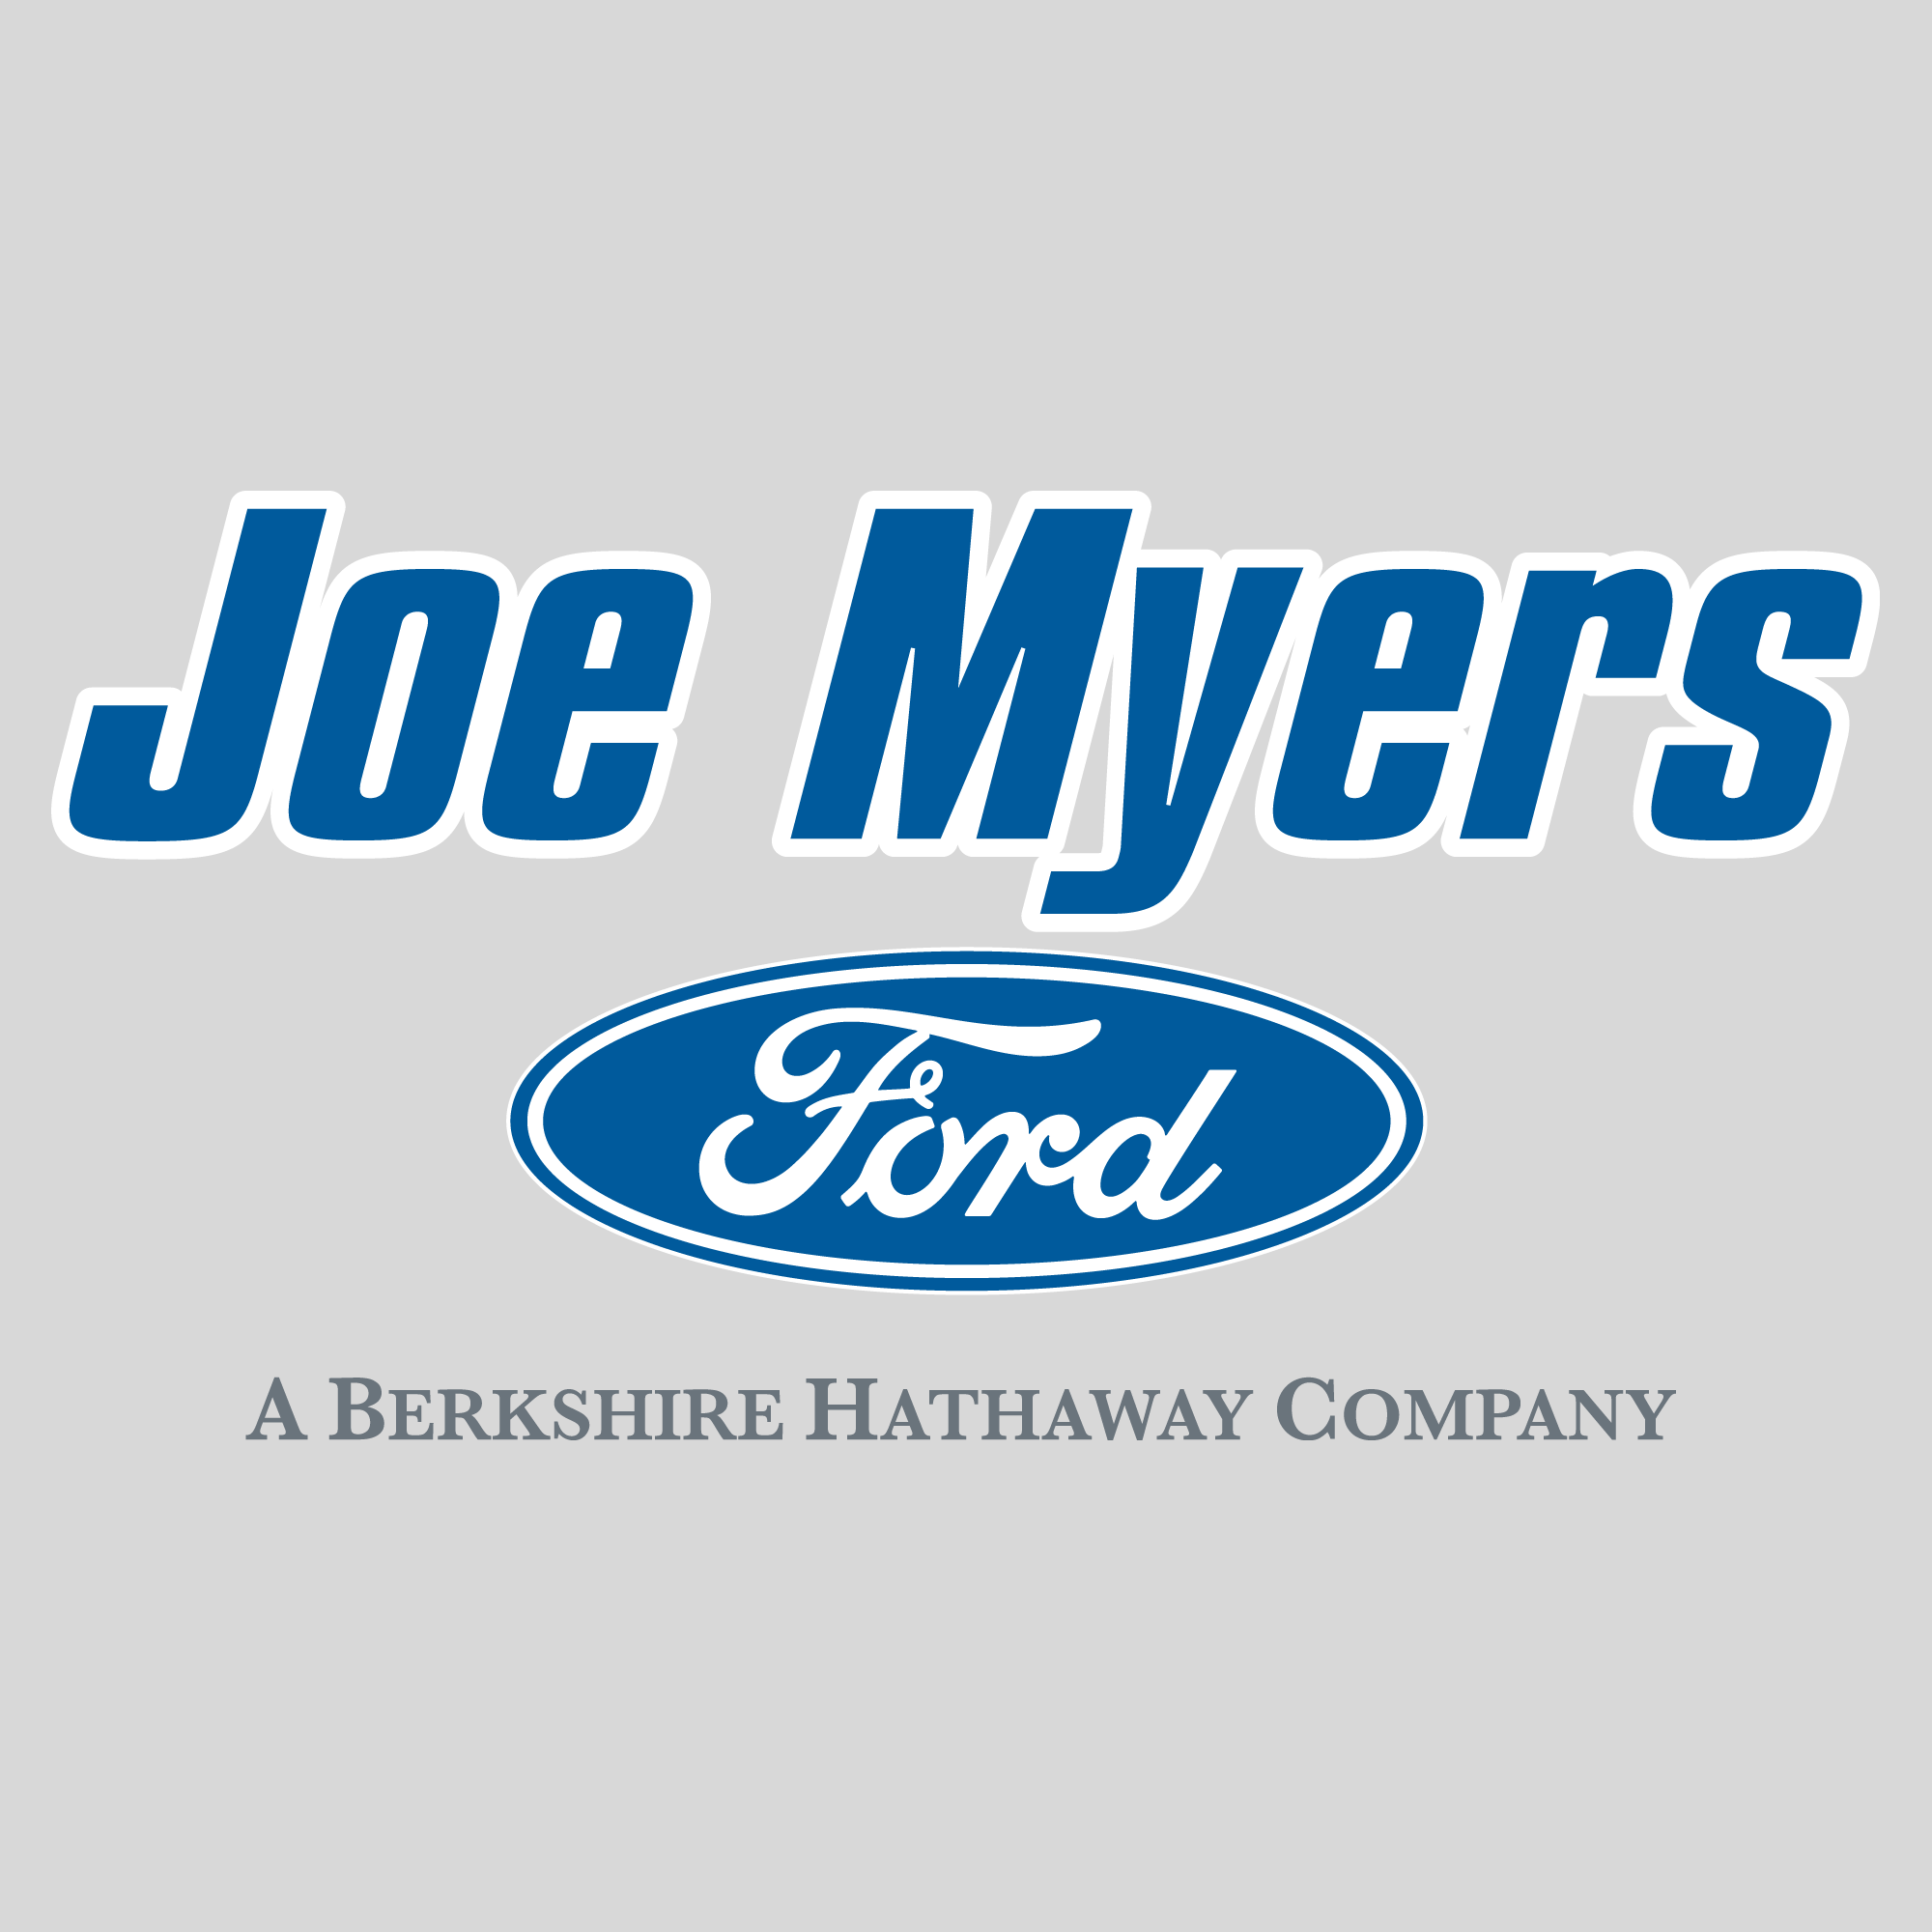 The Official Joe Myers Ford Twitter Account. Serving Houston and its surrounding cities for over 40 years!